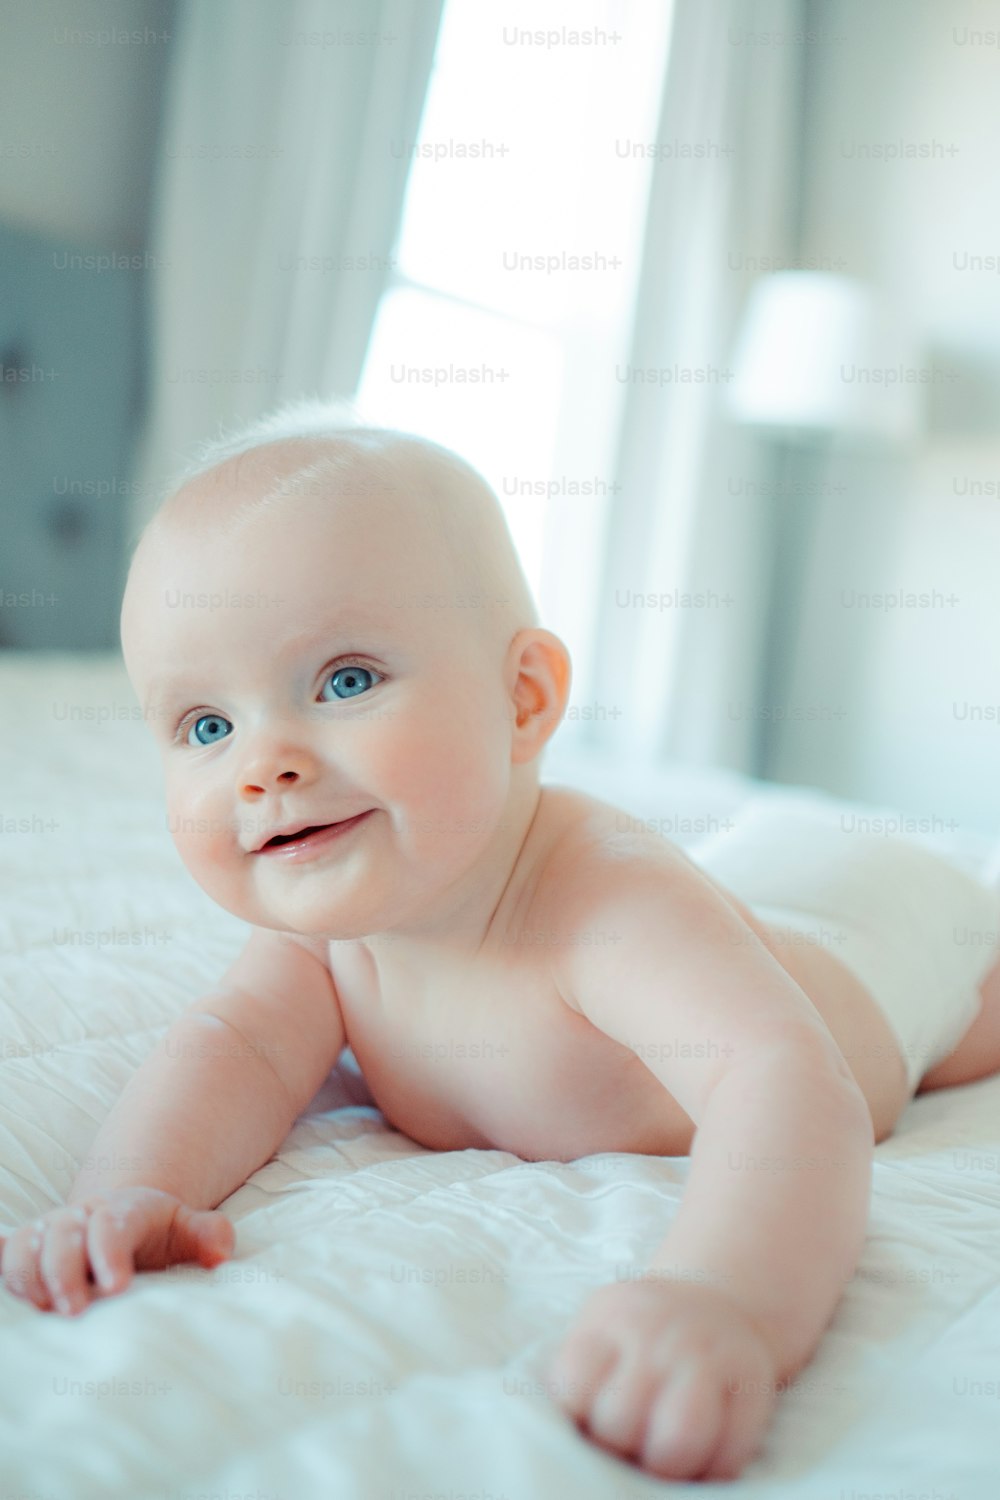 100+ Cute Baby Pictures [HD]  Download Free Images on Unsplash